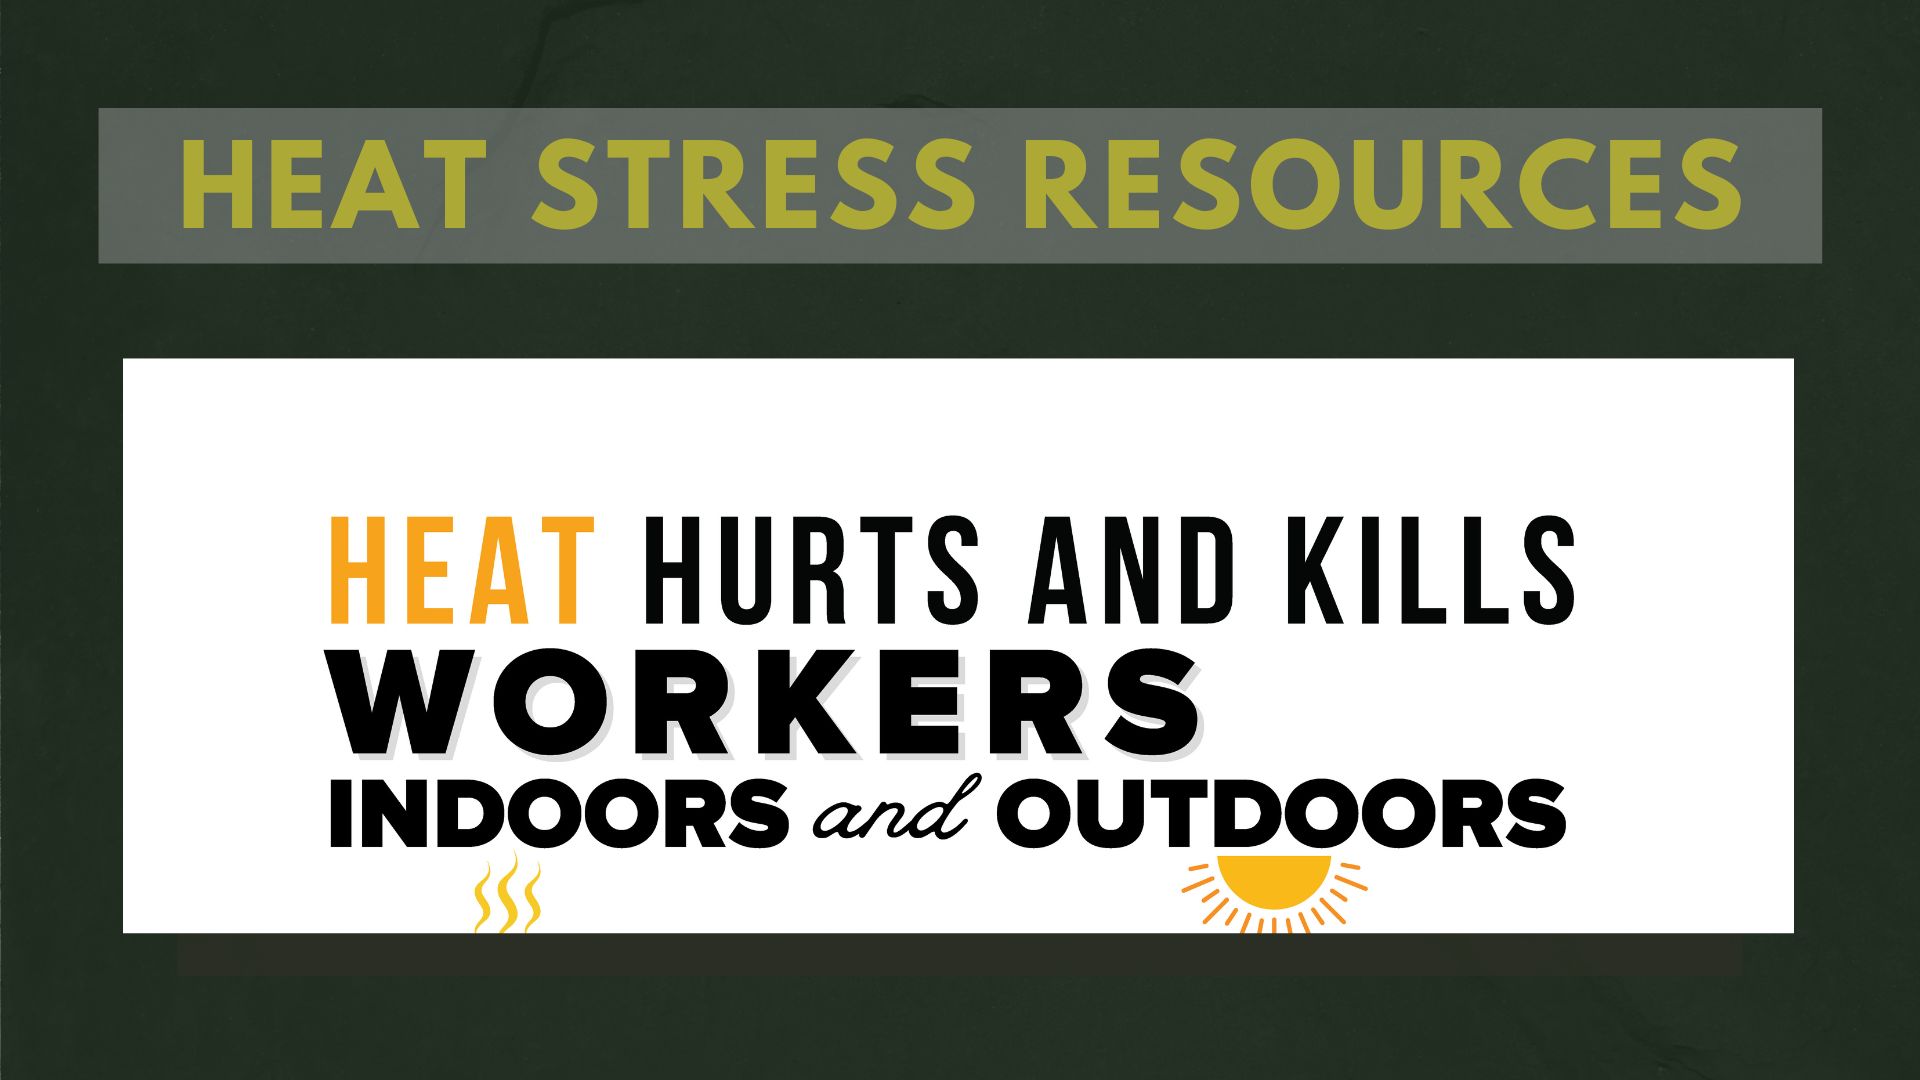 Image for Heat Stress Resources, with a banner reading "heat hurts and kills workers indoors and outdoors"